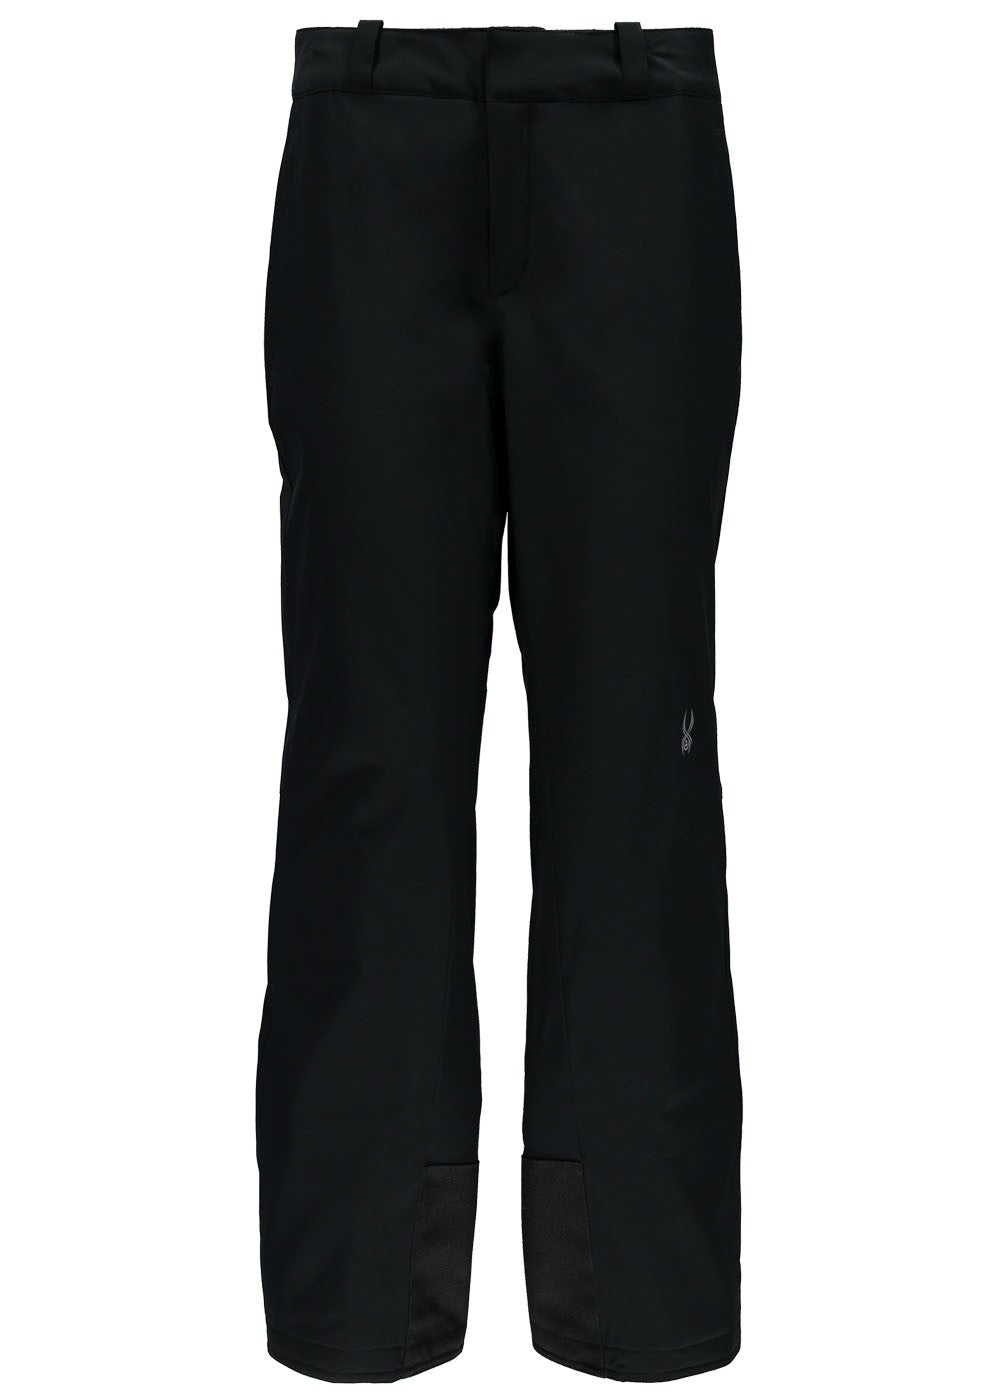 SPYDER GIRLS OLYMPIA SNOW PANT Size (Clothing) 12